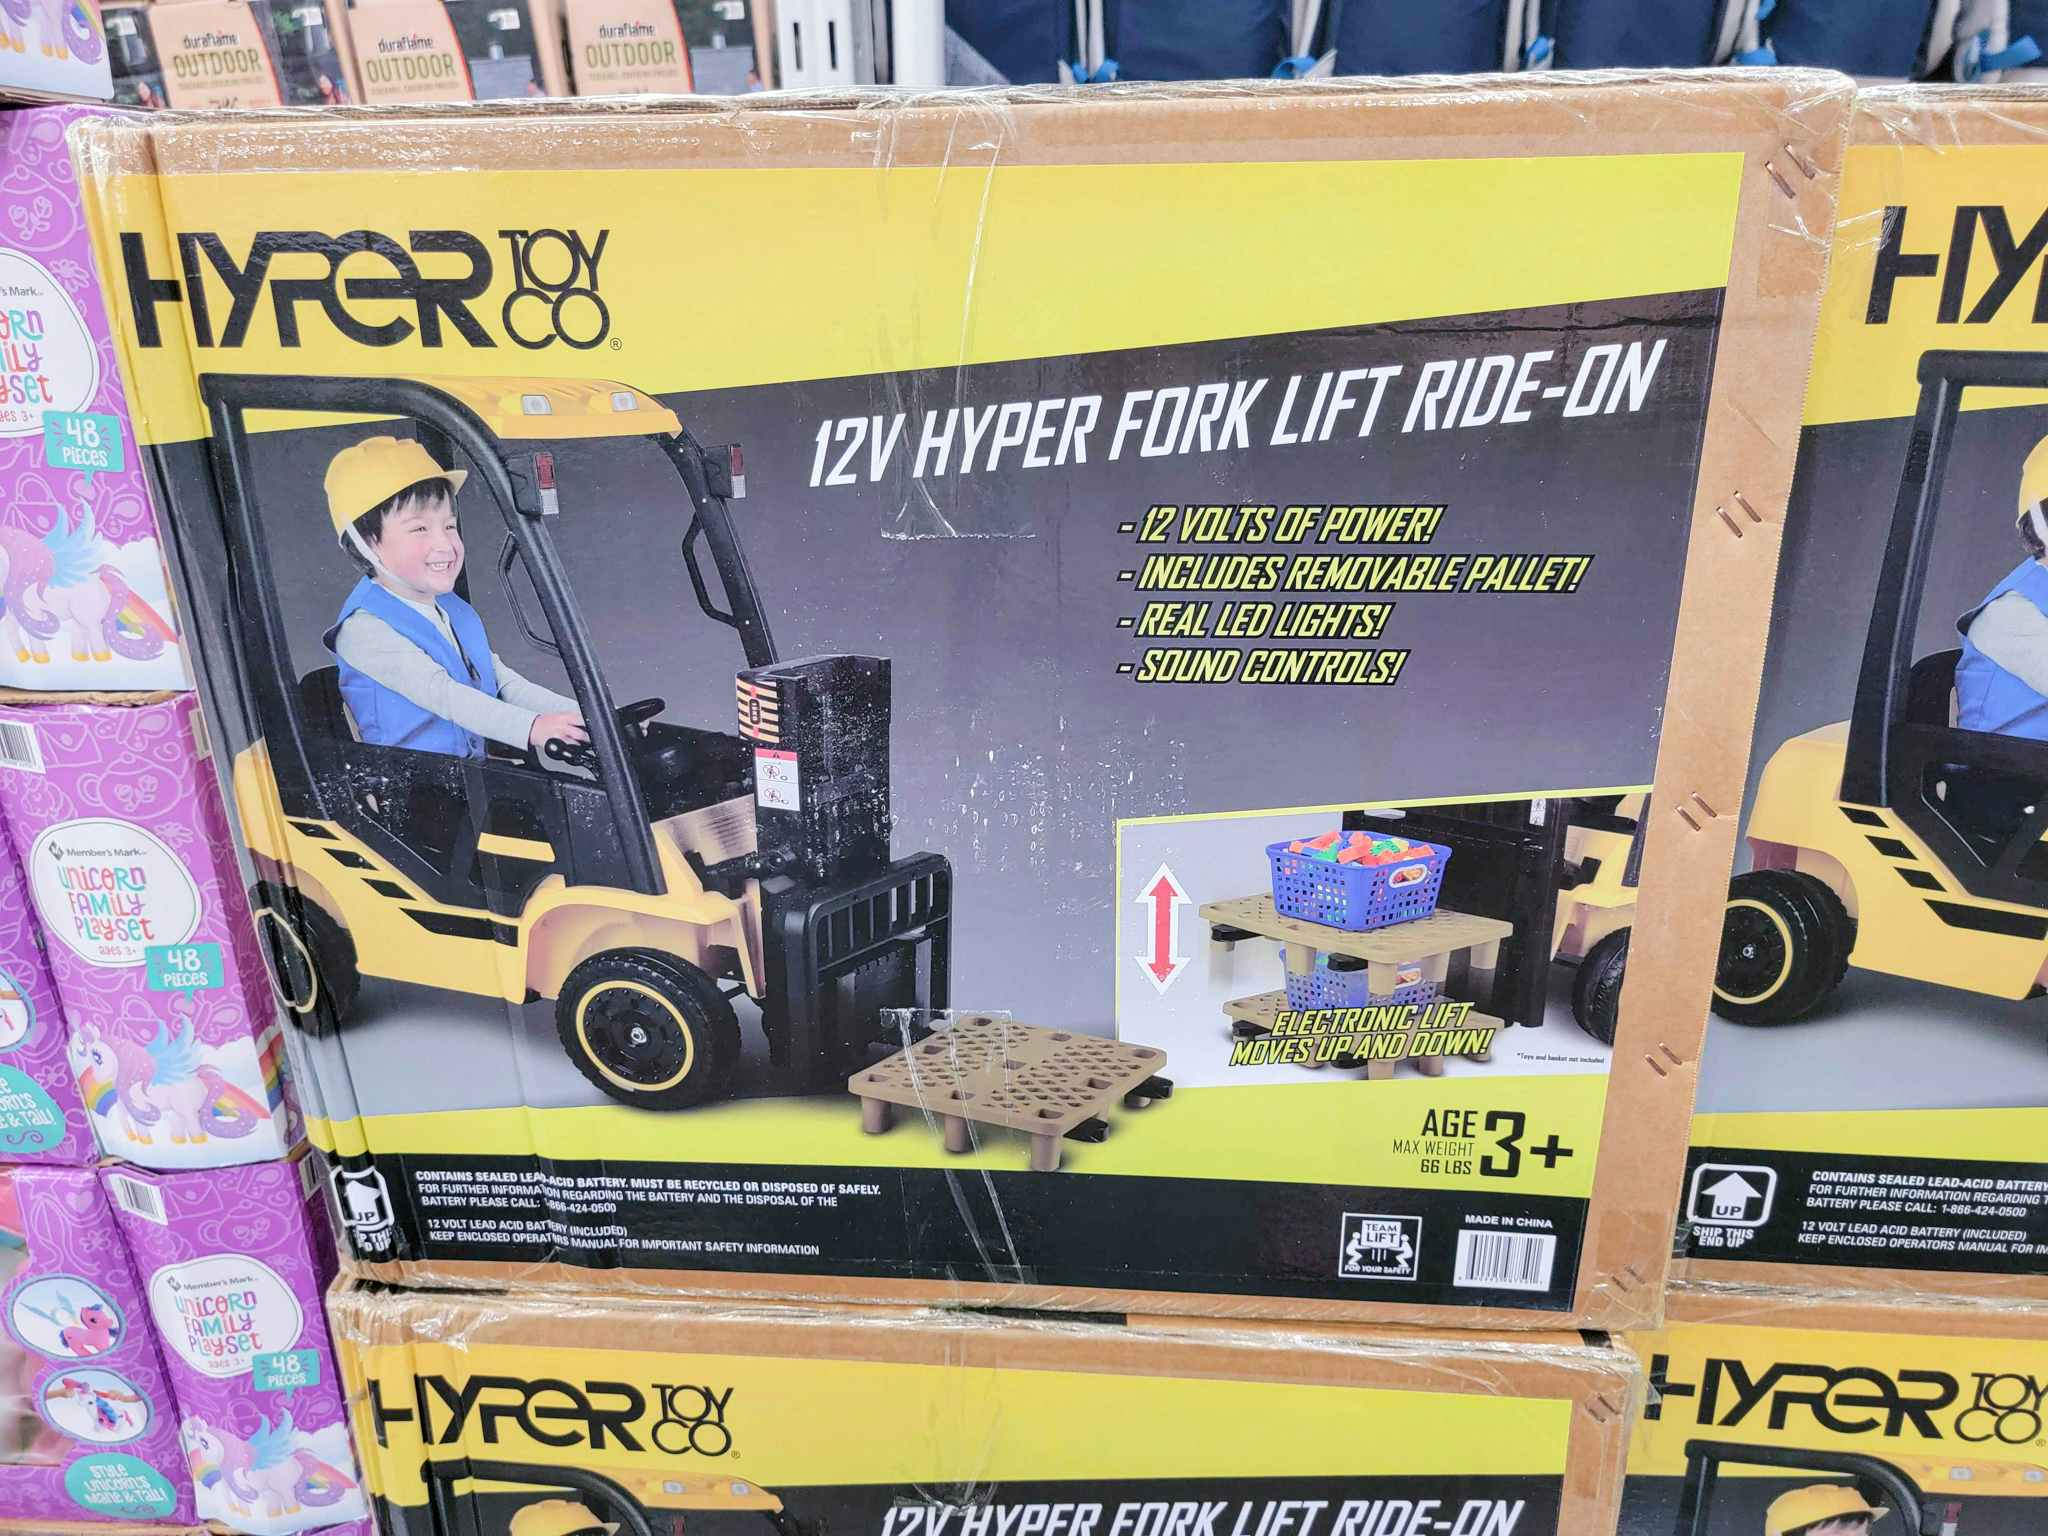 fork lift ride on toy